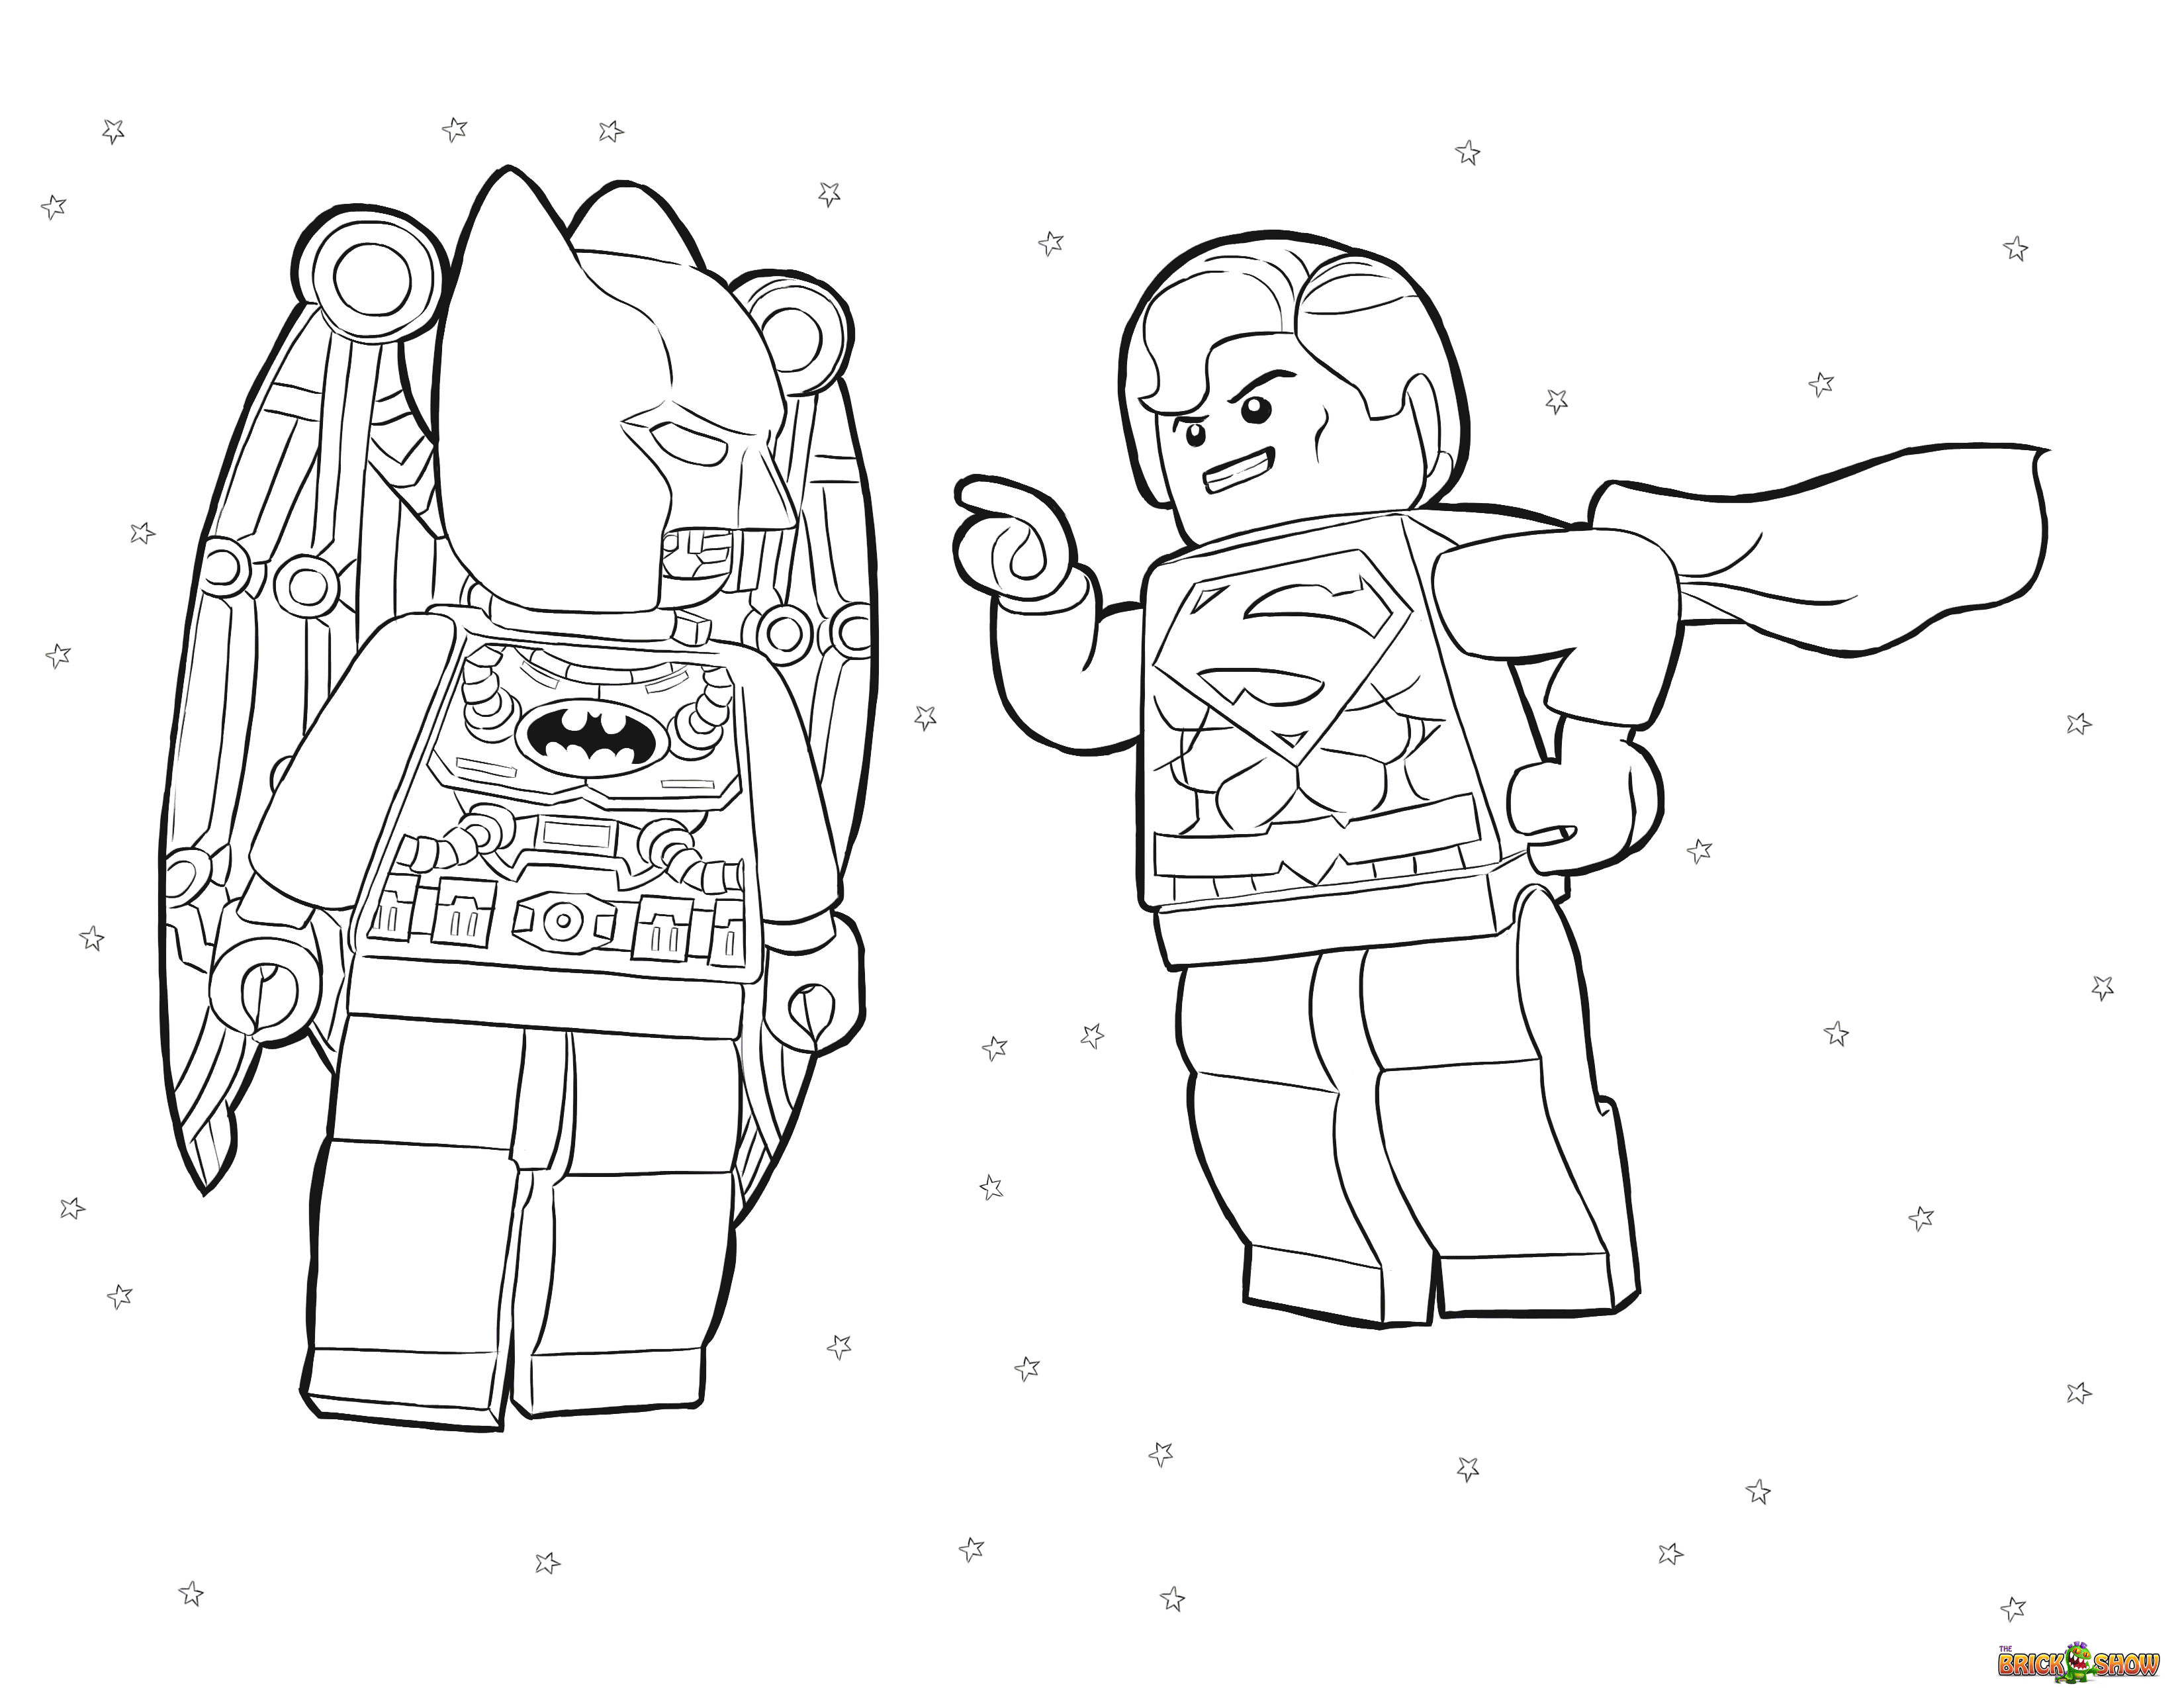 Lego Superman Coloring Page - Coloring Home